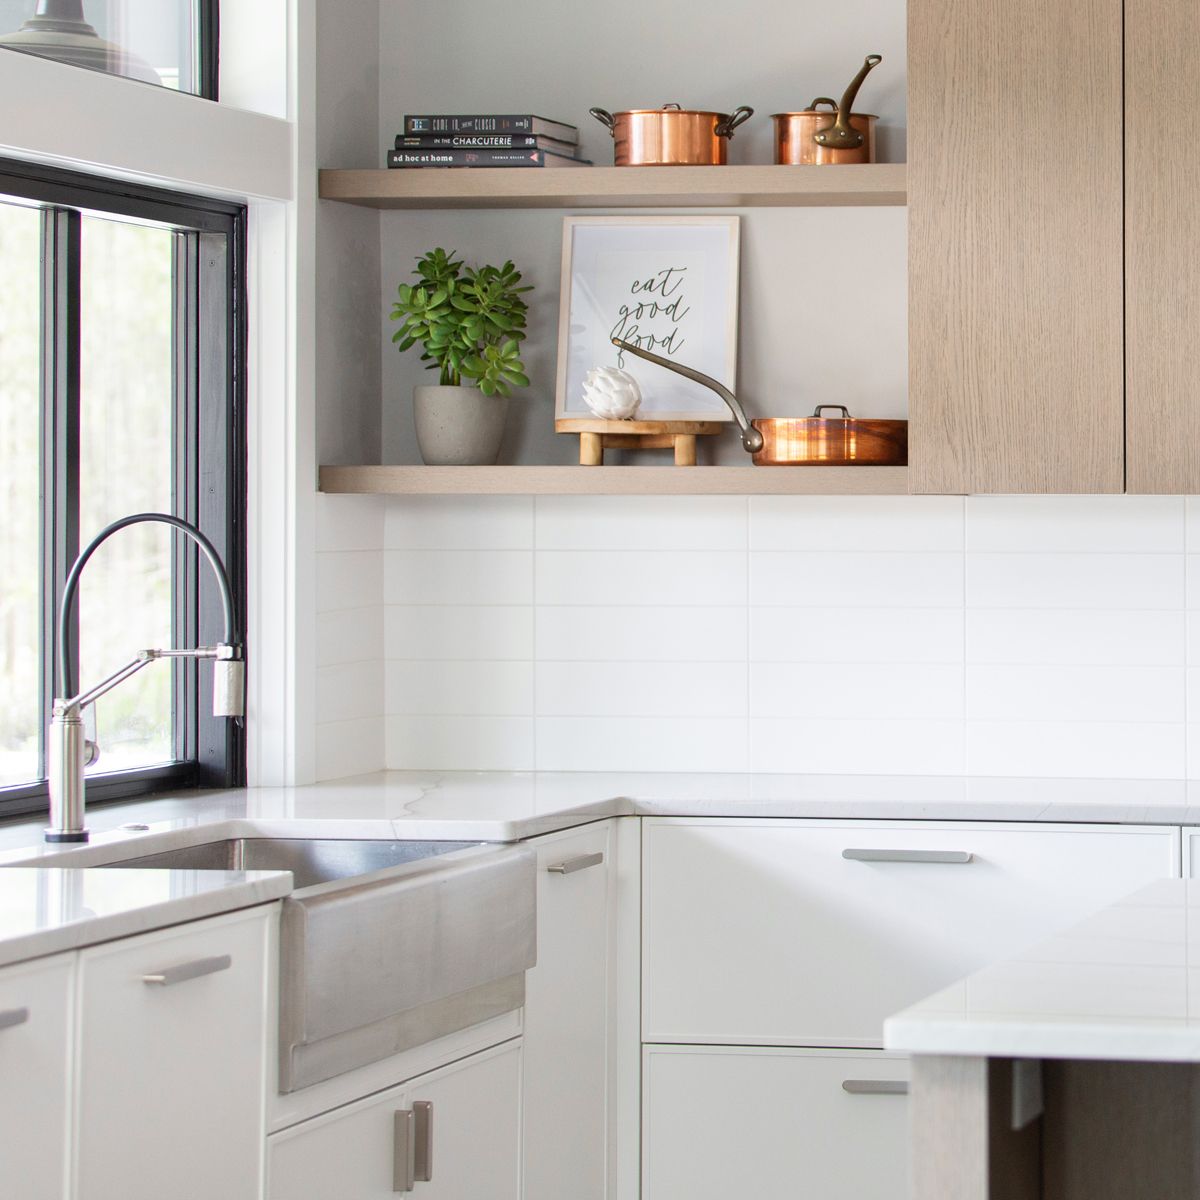 Modern kitchen with silver ranch style sink, white tile backsplash, white cabinets, and countertops with accents of light colored wood. Open-faced cabinet with copper pots